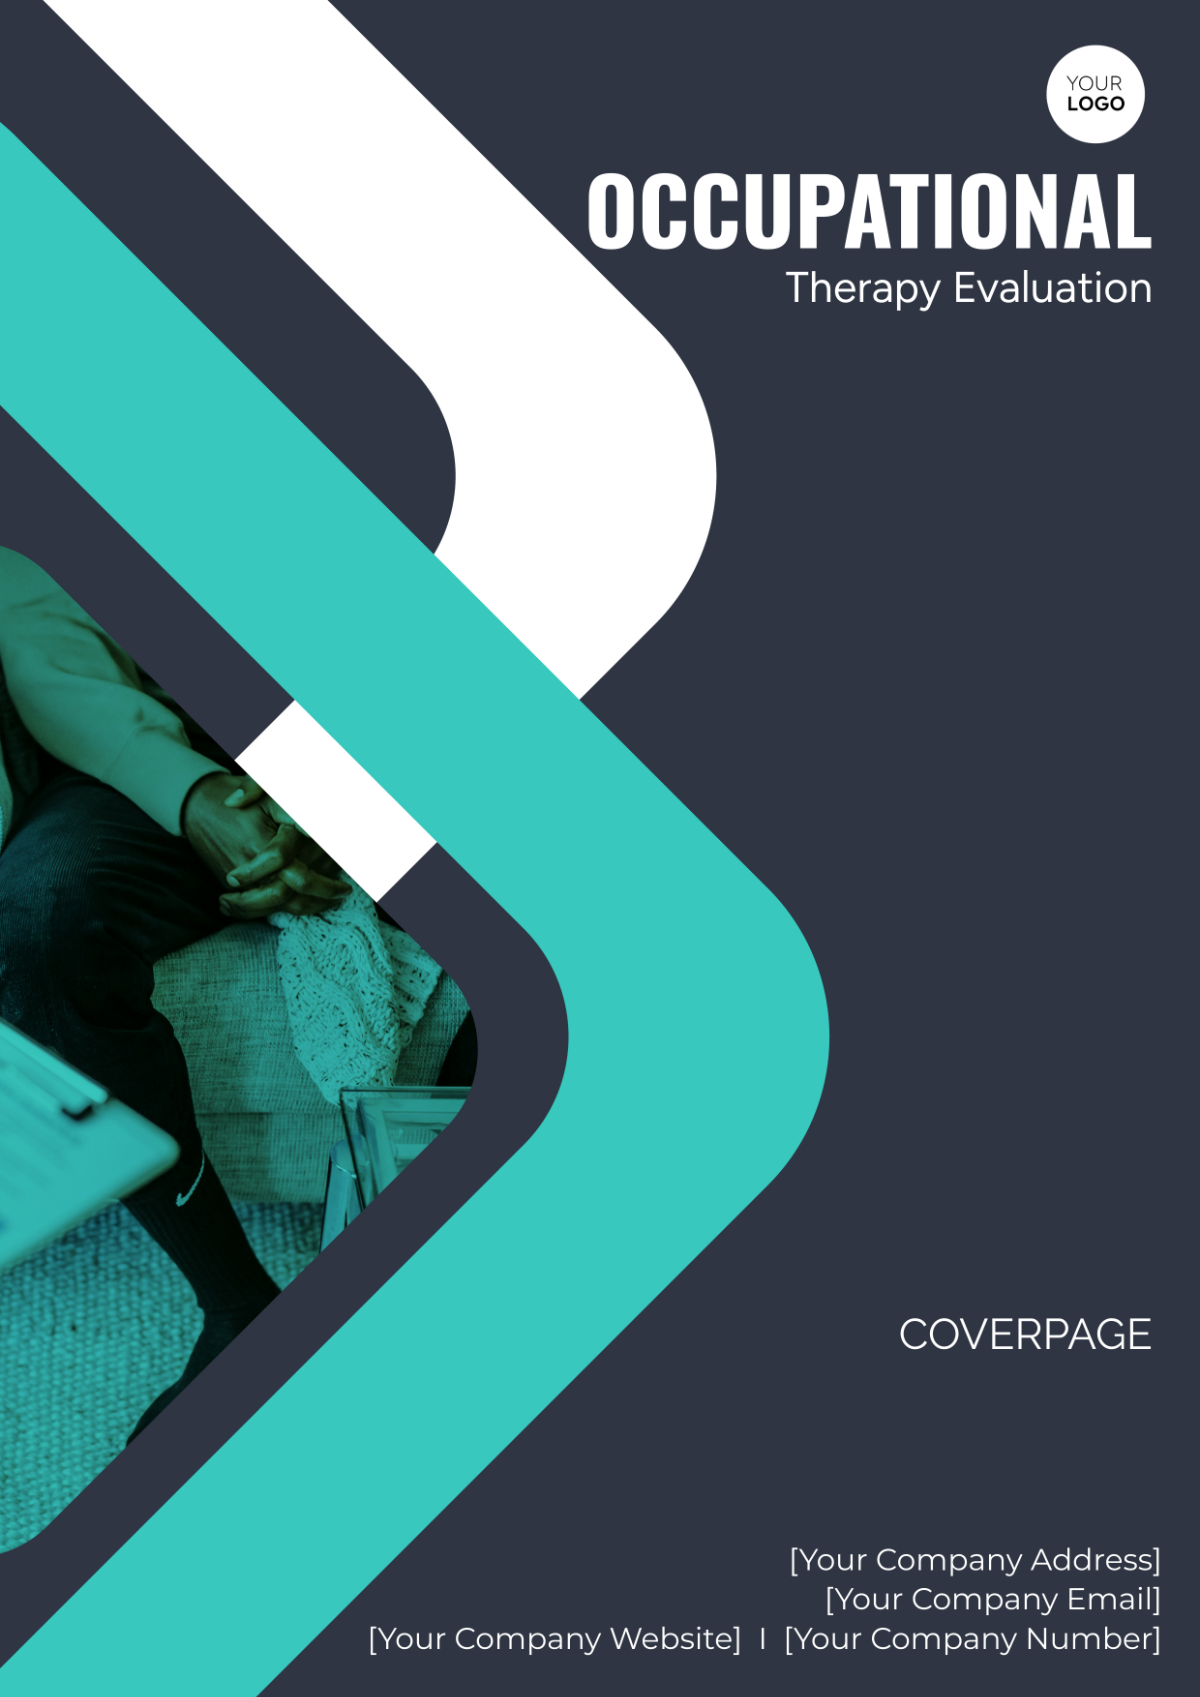 Occupational Therapy Cover Page